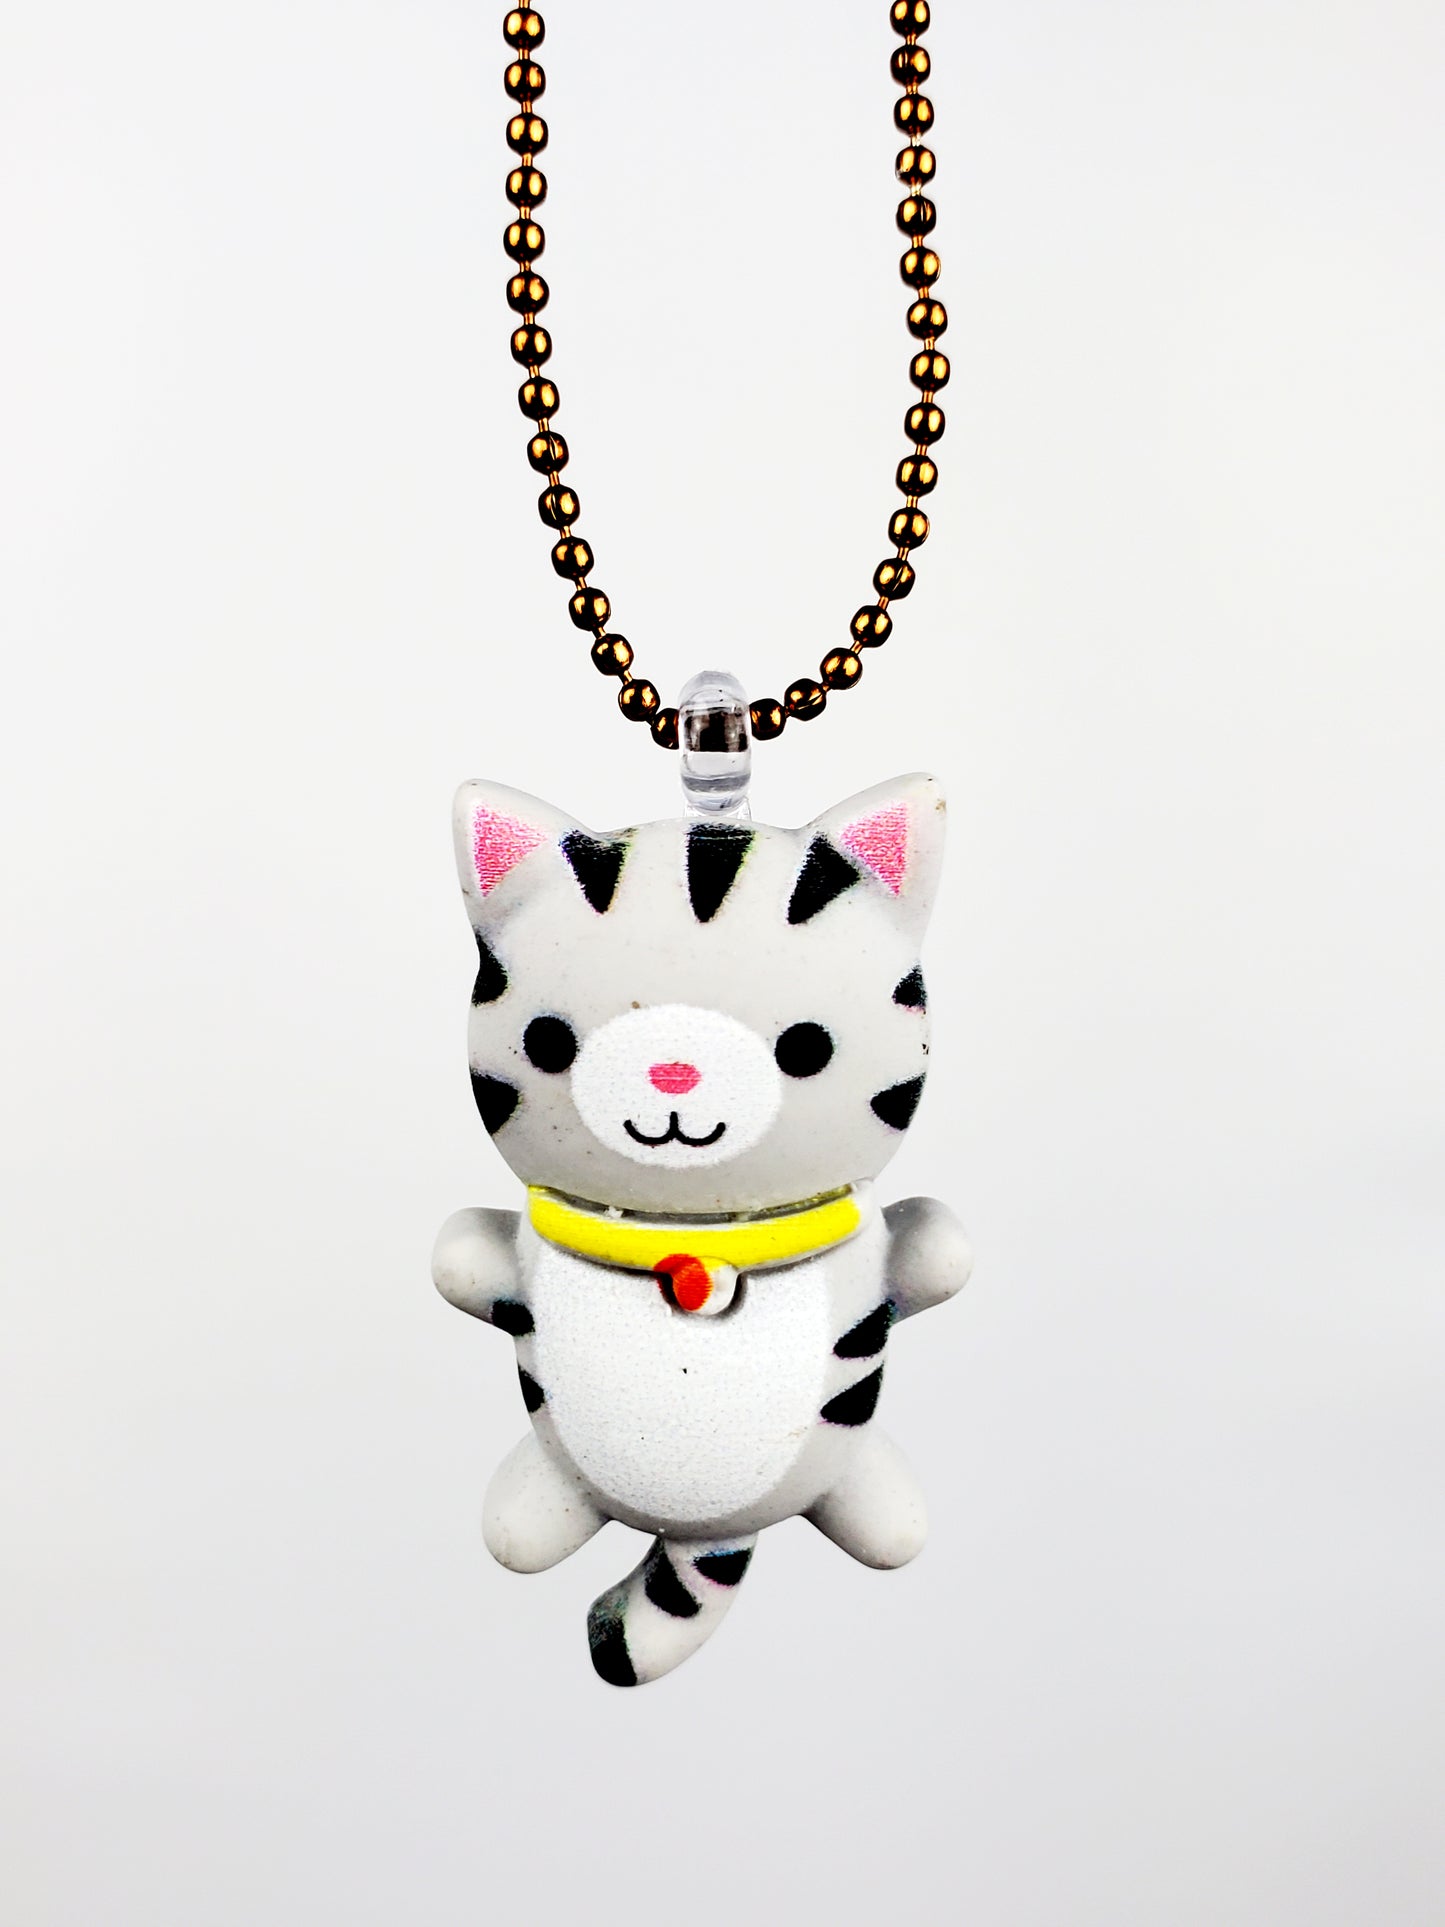 Kitty Necklace